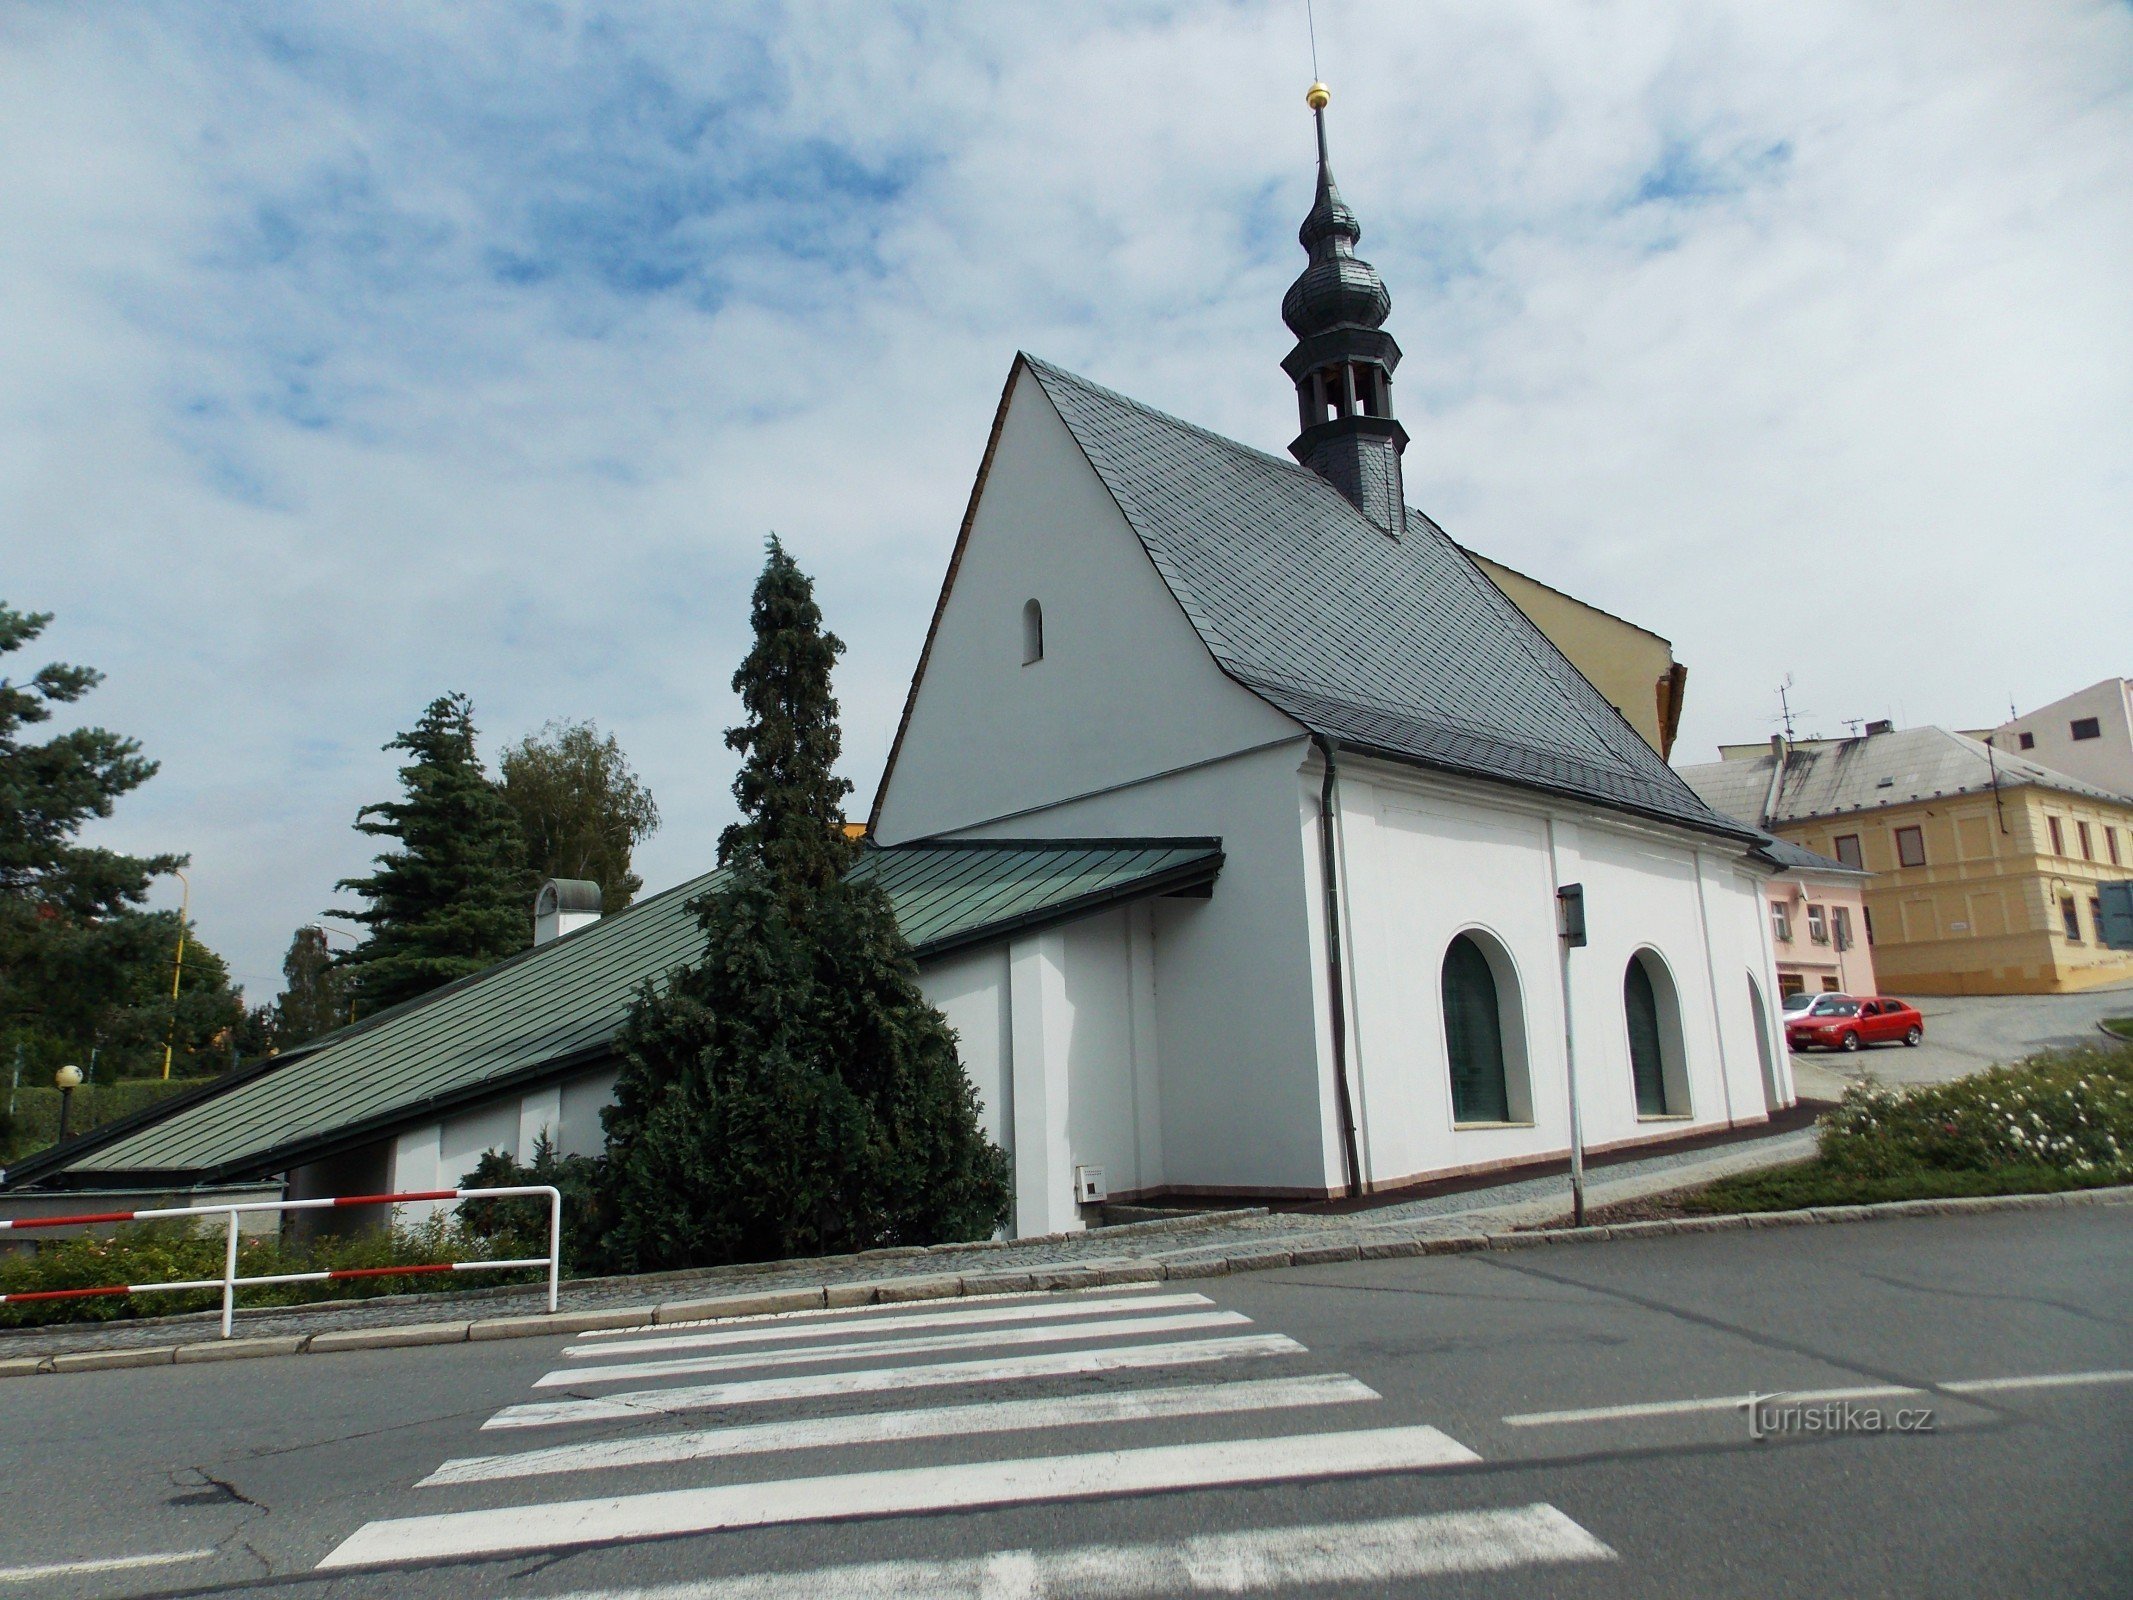 Chapel of St. Barbory ​​in Bílovec